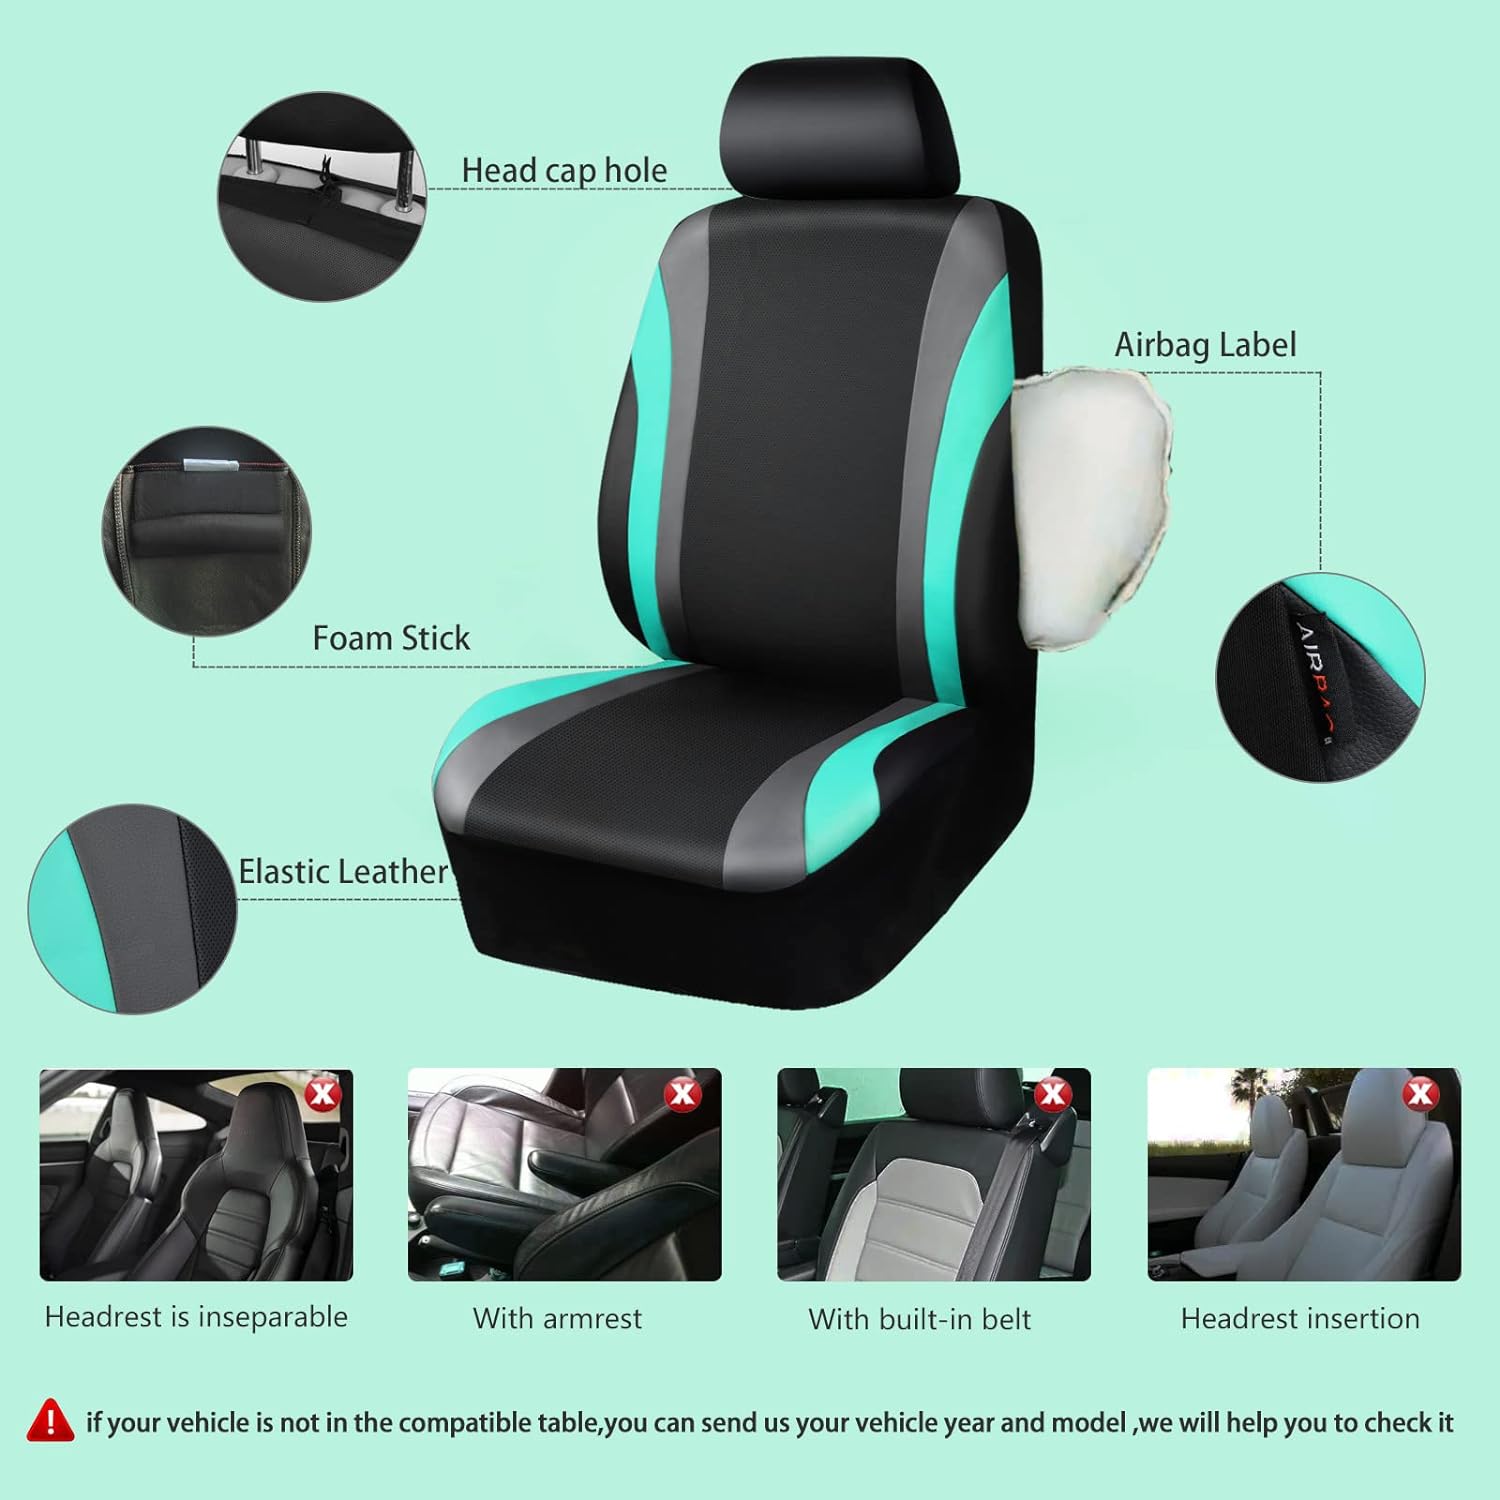 CAR PASS Line Rider Leather Car Seat Cover and Steering Wheel Cover Combo Fits for 95% Truck, SUV, Sedan. 14.5-15 Inch Anti-Slip Desgin. 3 Zipper Bench. (Black and Mint)